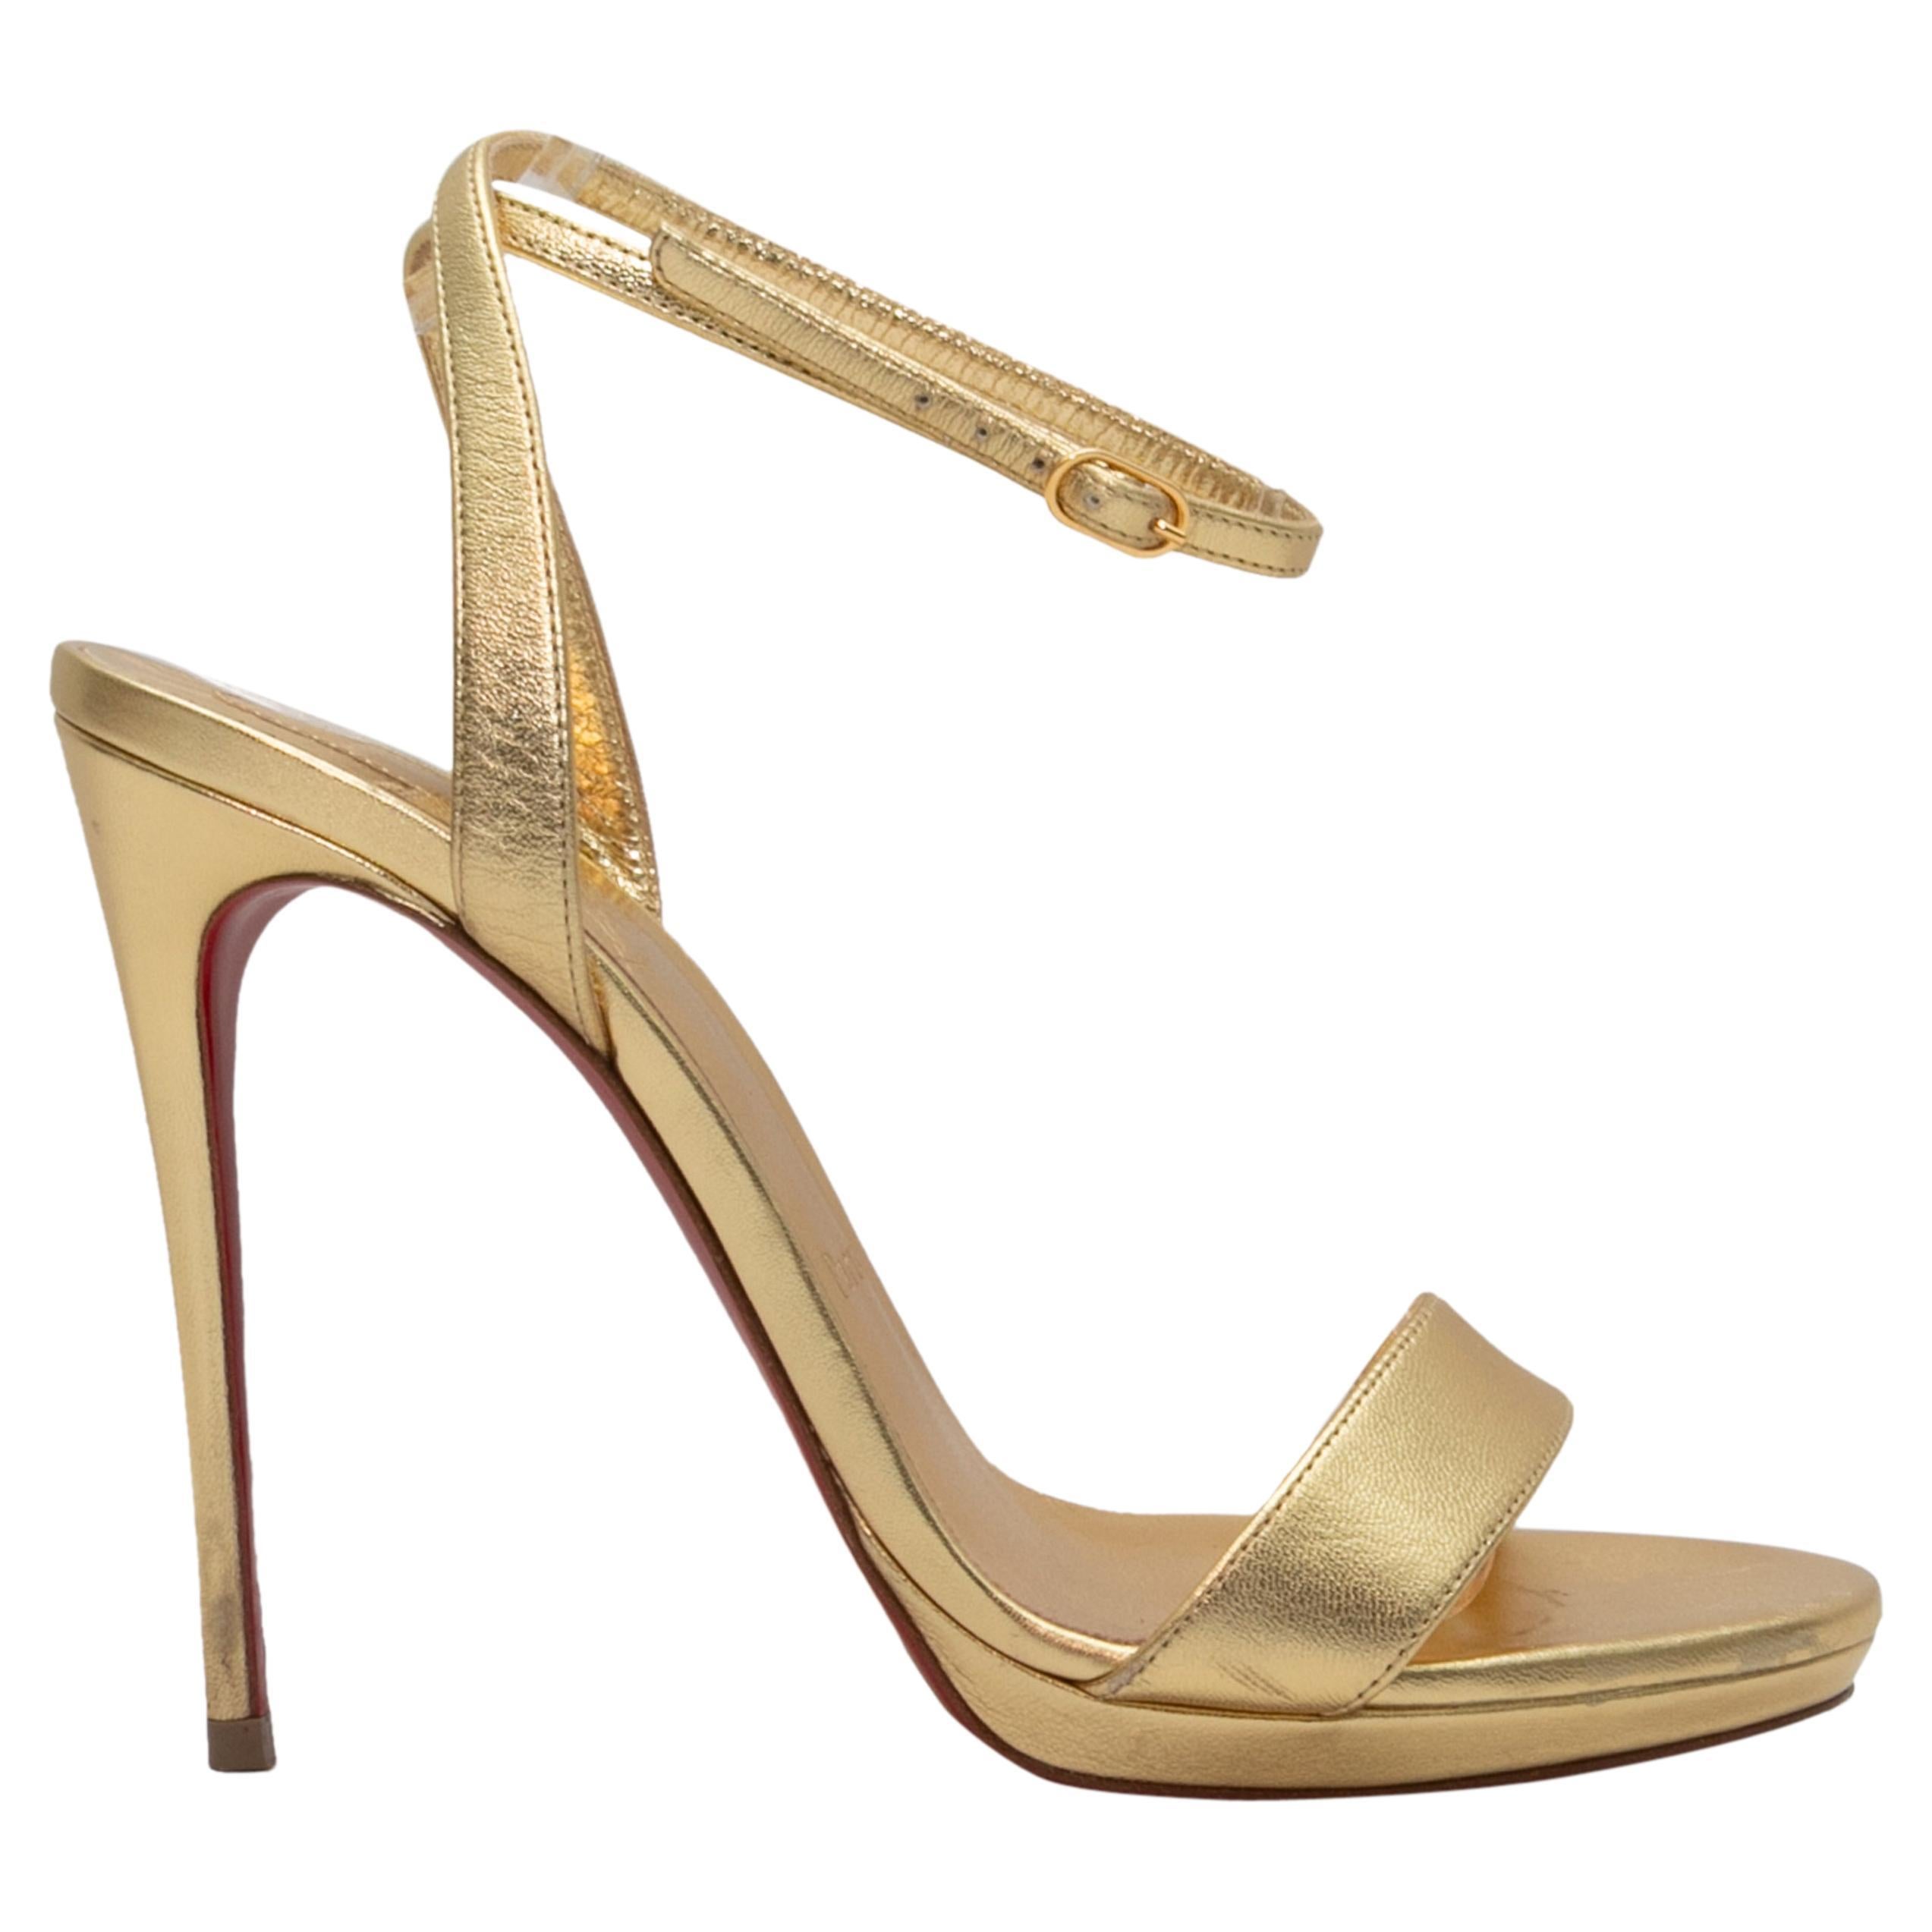 Gold Christian Louboutin Leather Heeled Sandals Size 37